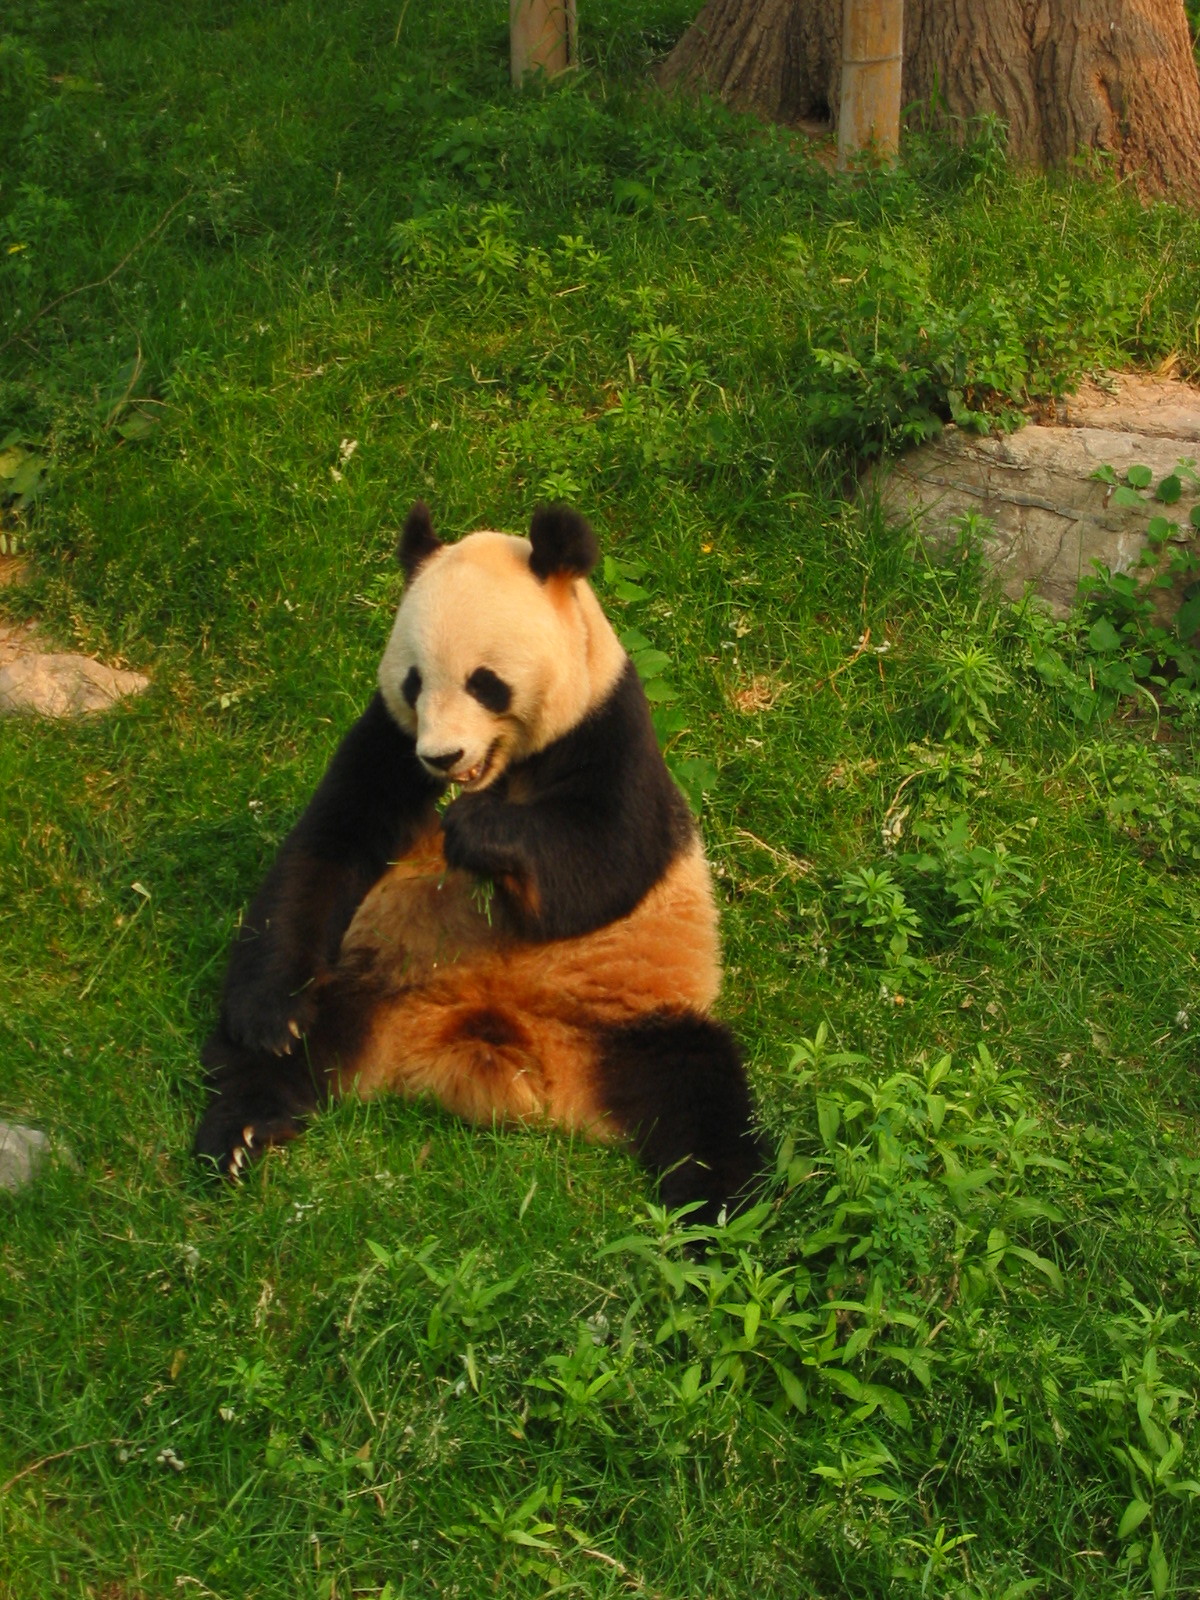 the panda bear is sitting in the grass